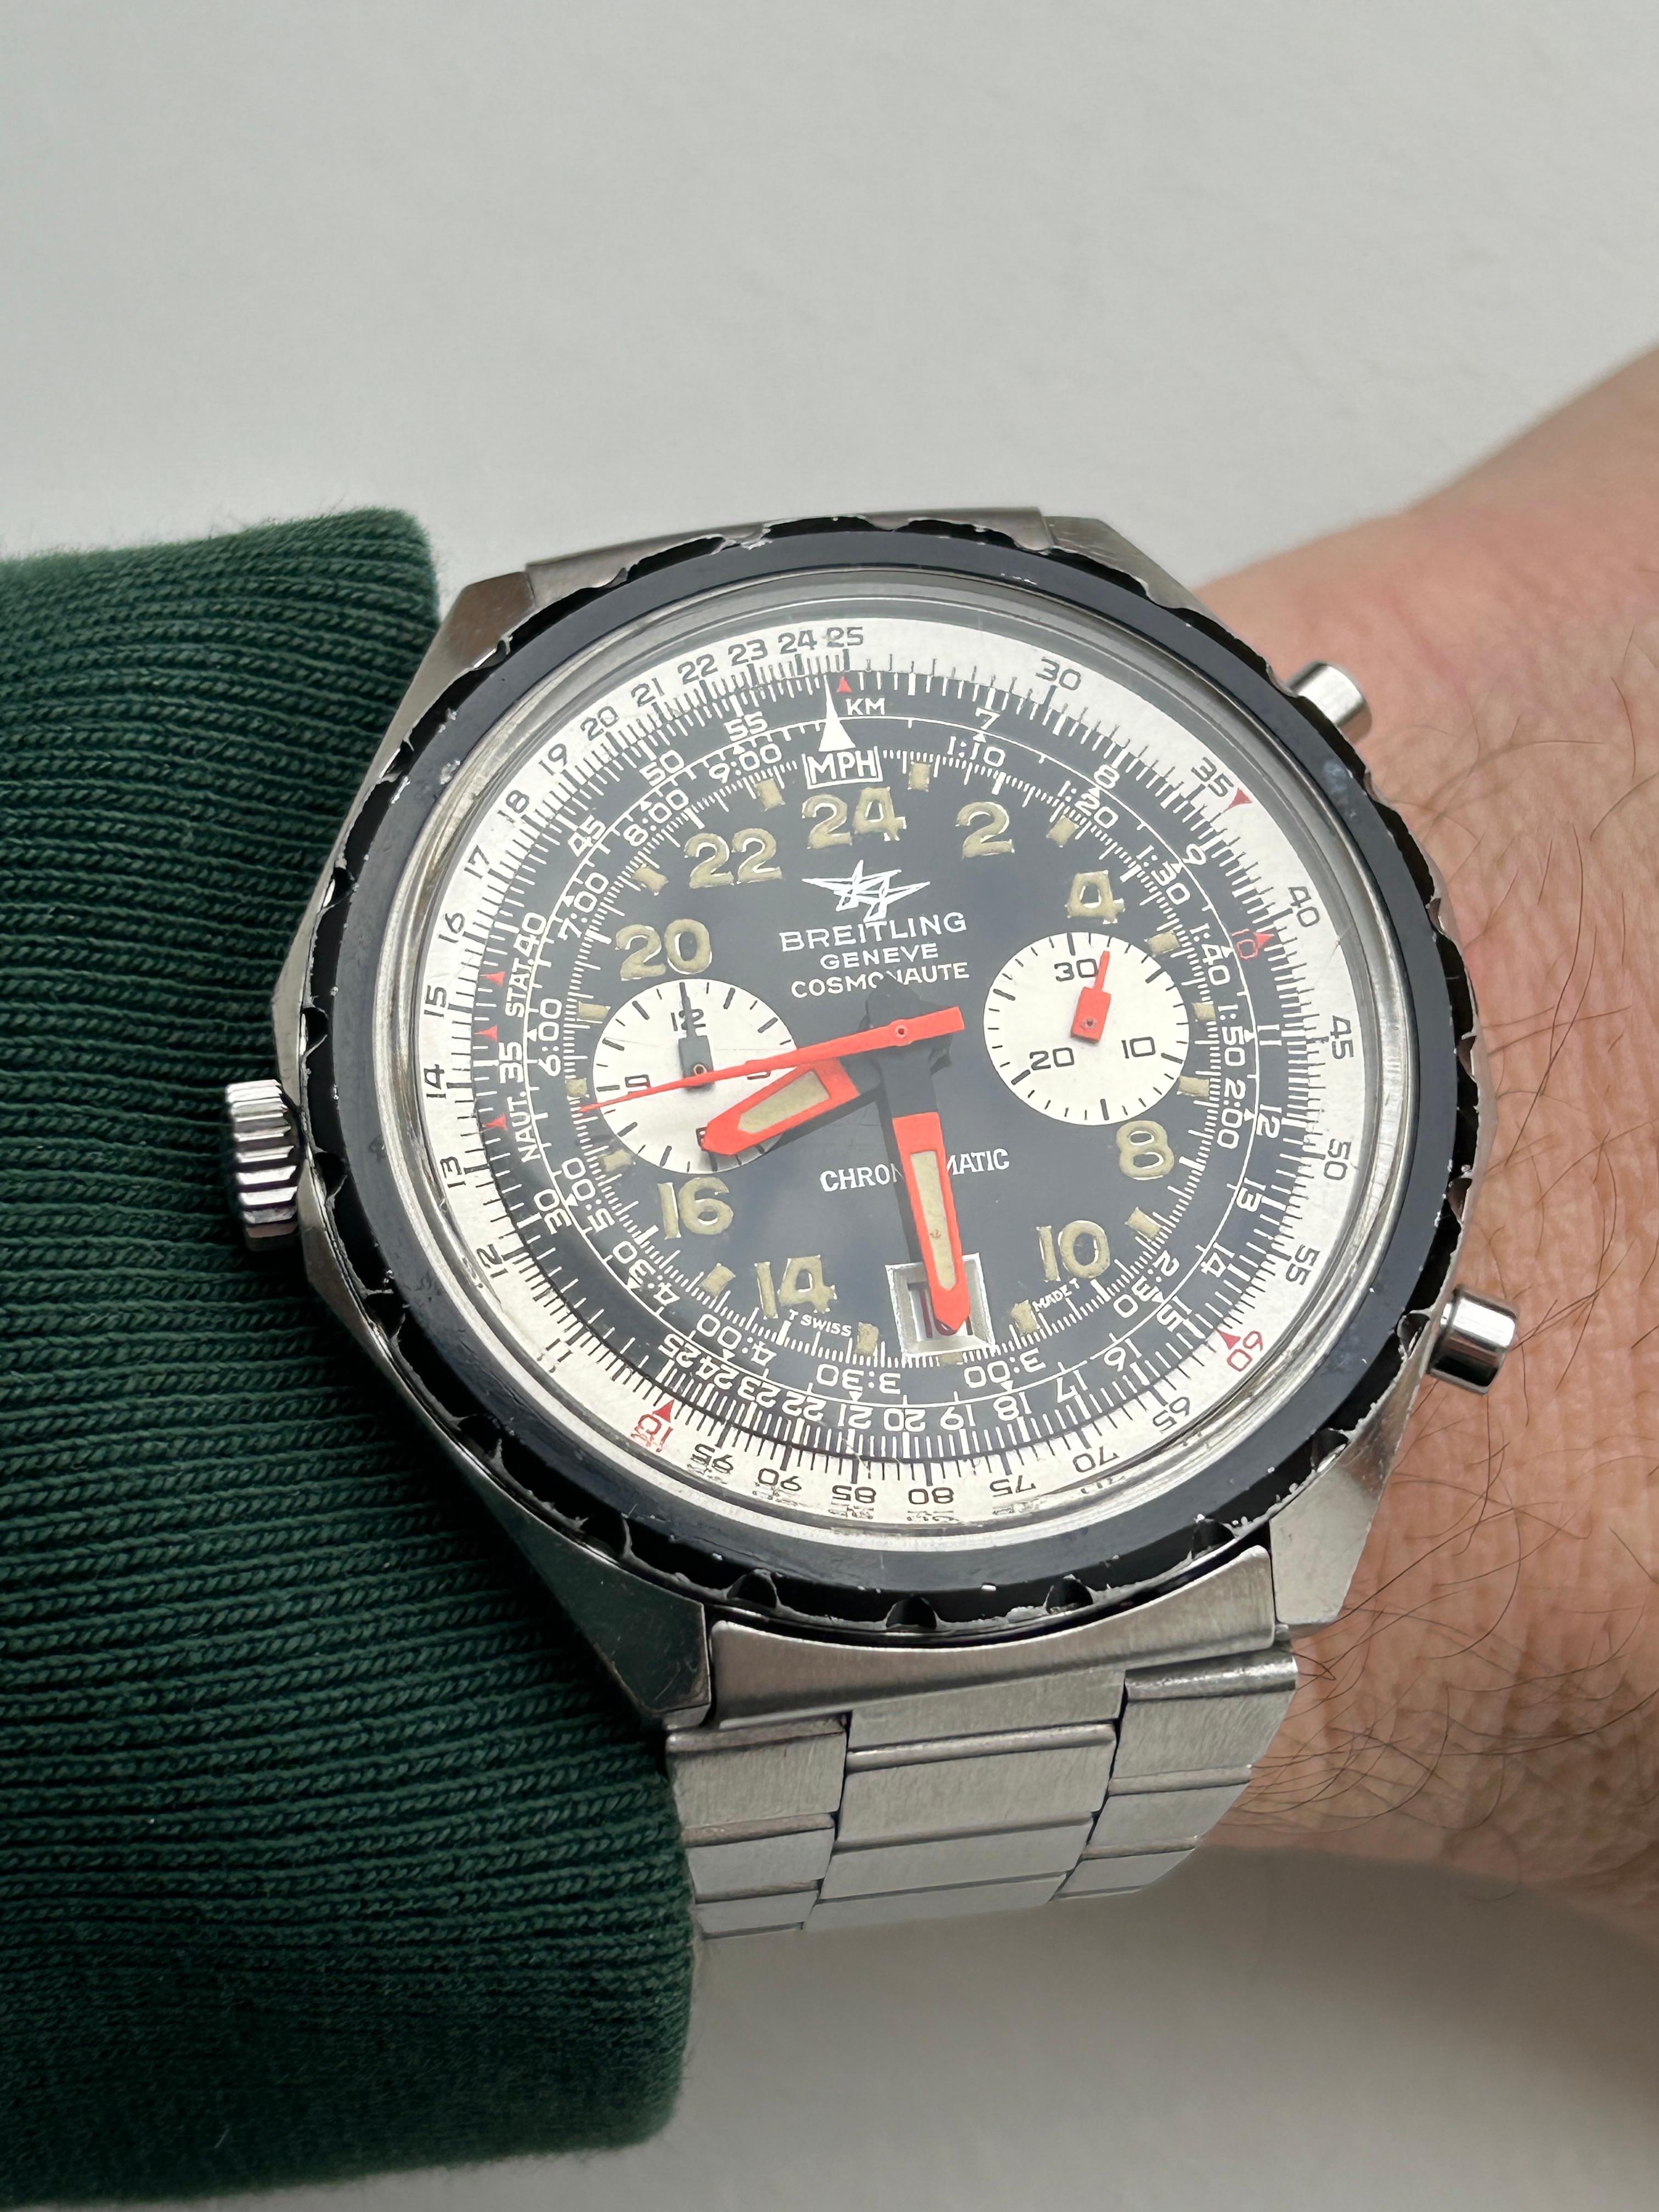 Breitling Cosmonaute Chrono-matic Wristwatch 1809, Call 11, 48mm Case. c1970. For Sale 2